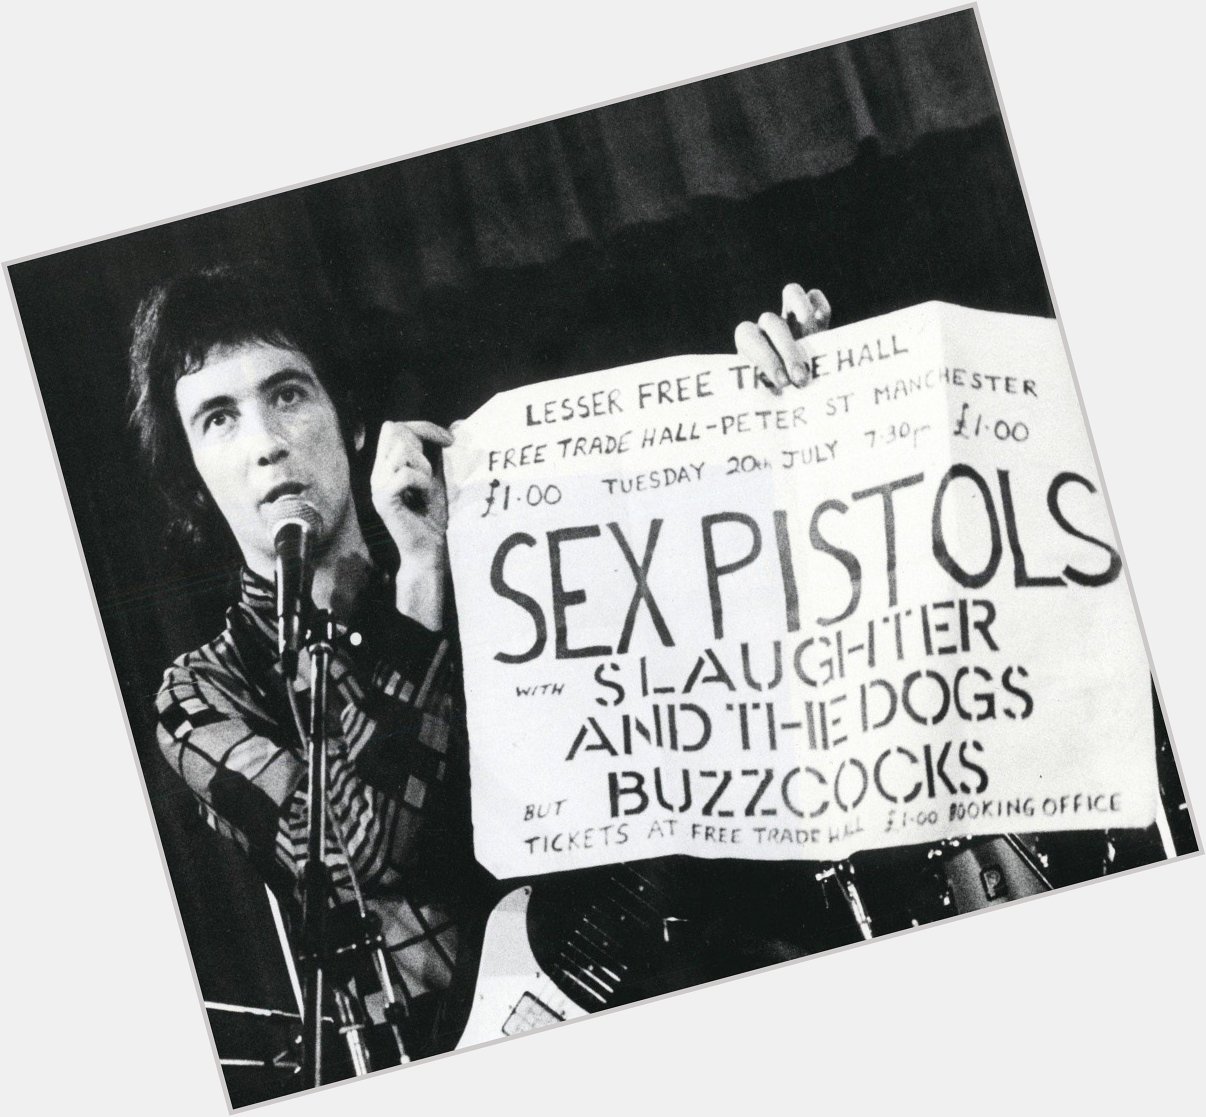 Happy birthday to Pete Shelley of the 